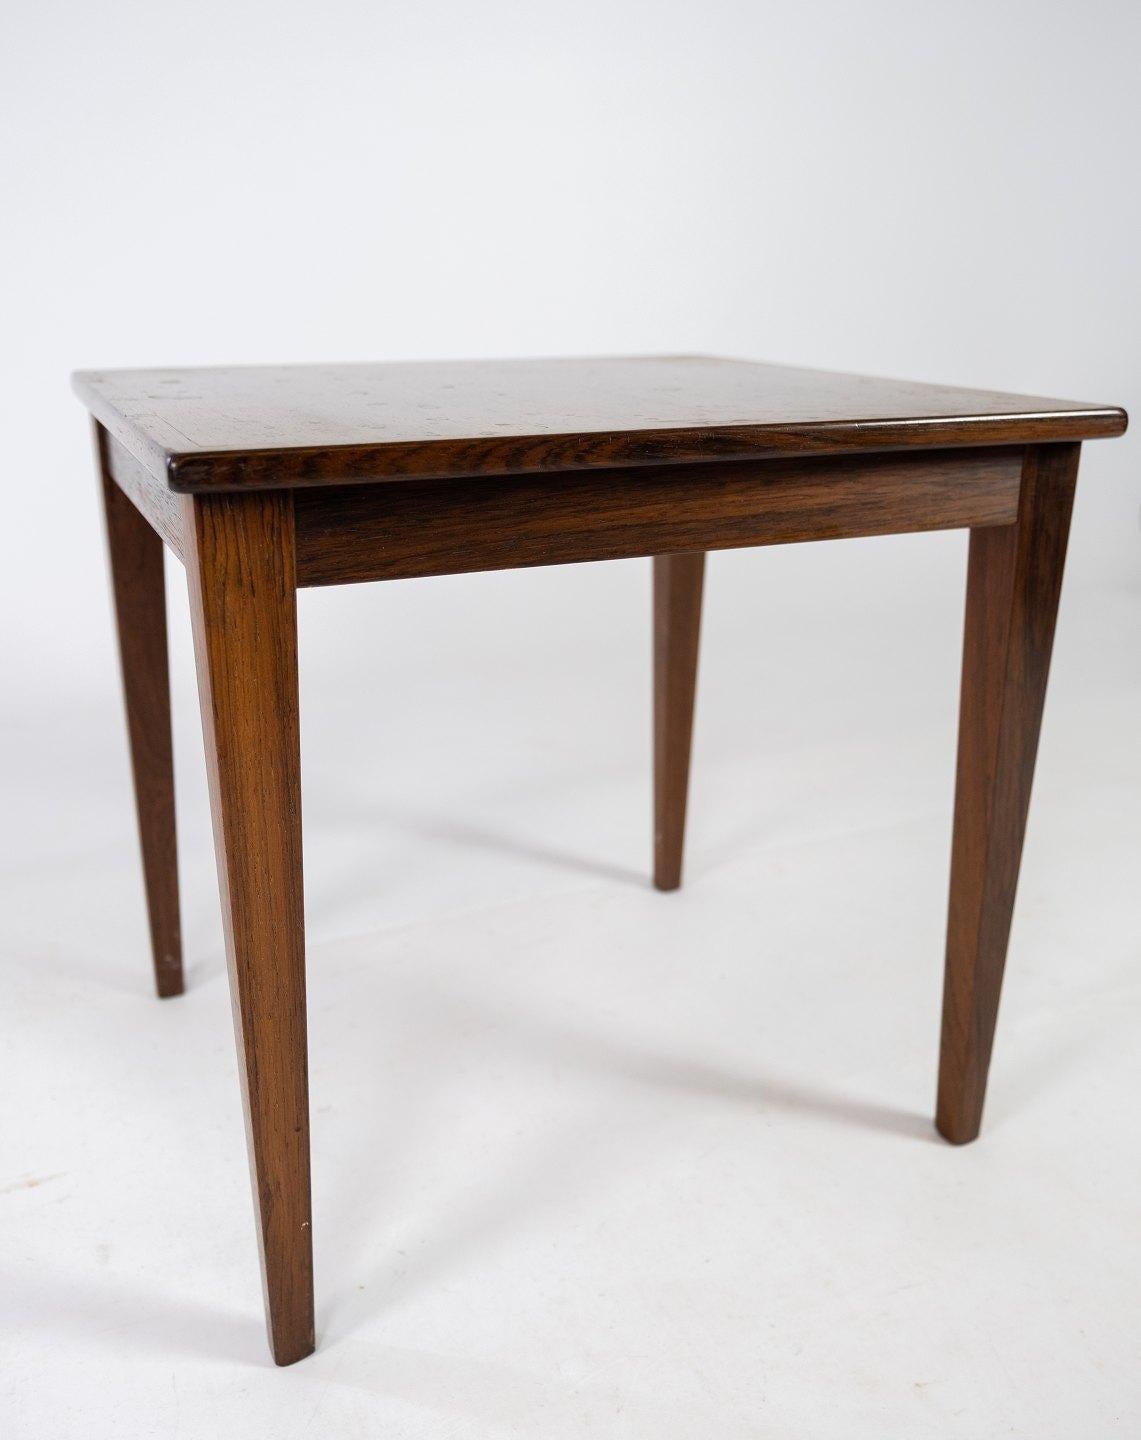 Side Table Made In Rosewood, Danish Design From 1960s In Good Condition For Sale In Lejre, DK